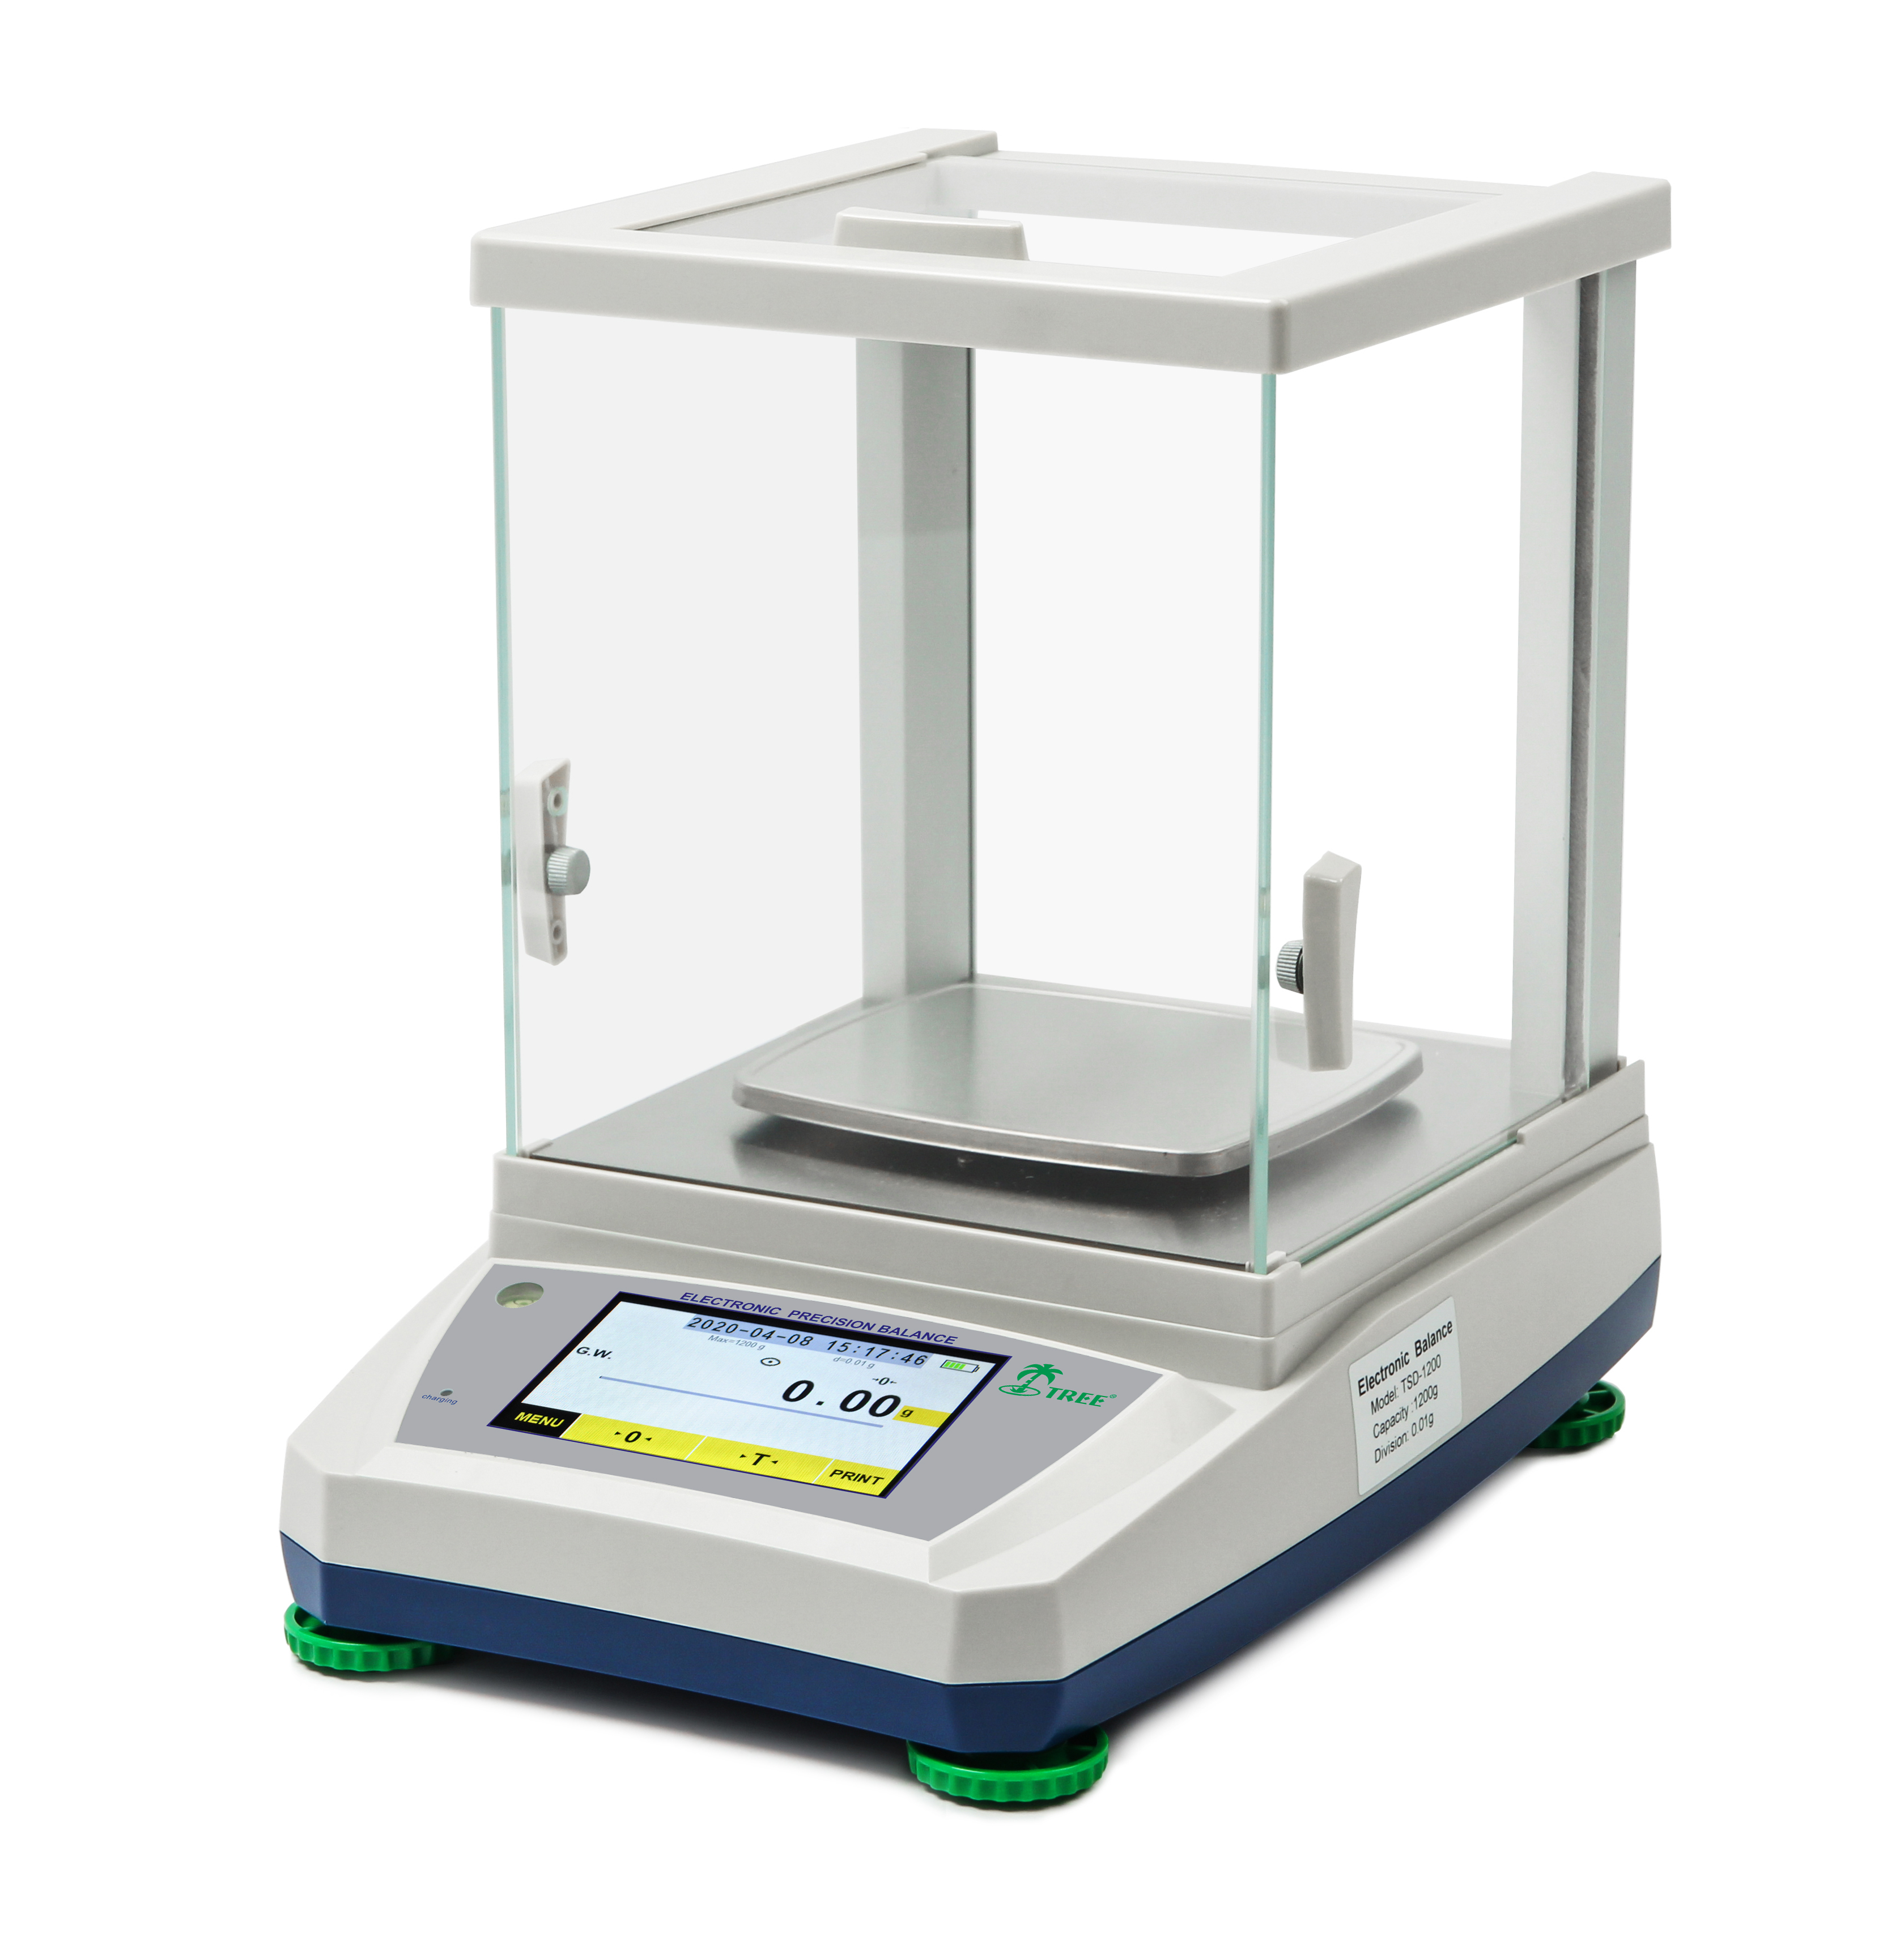 TSD touch screen balance with density measuring function